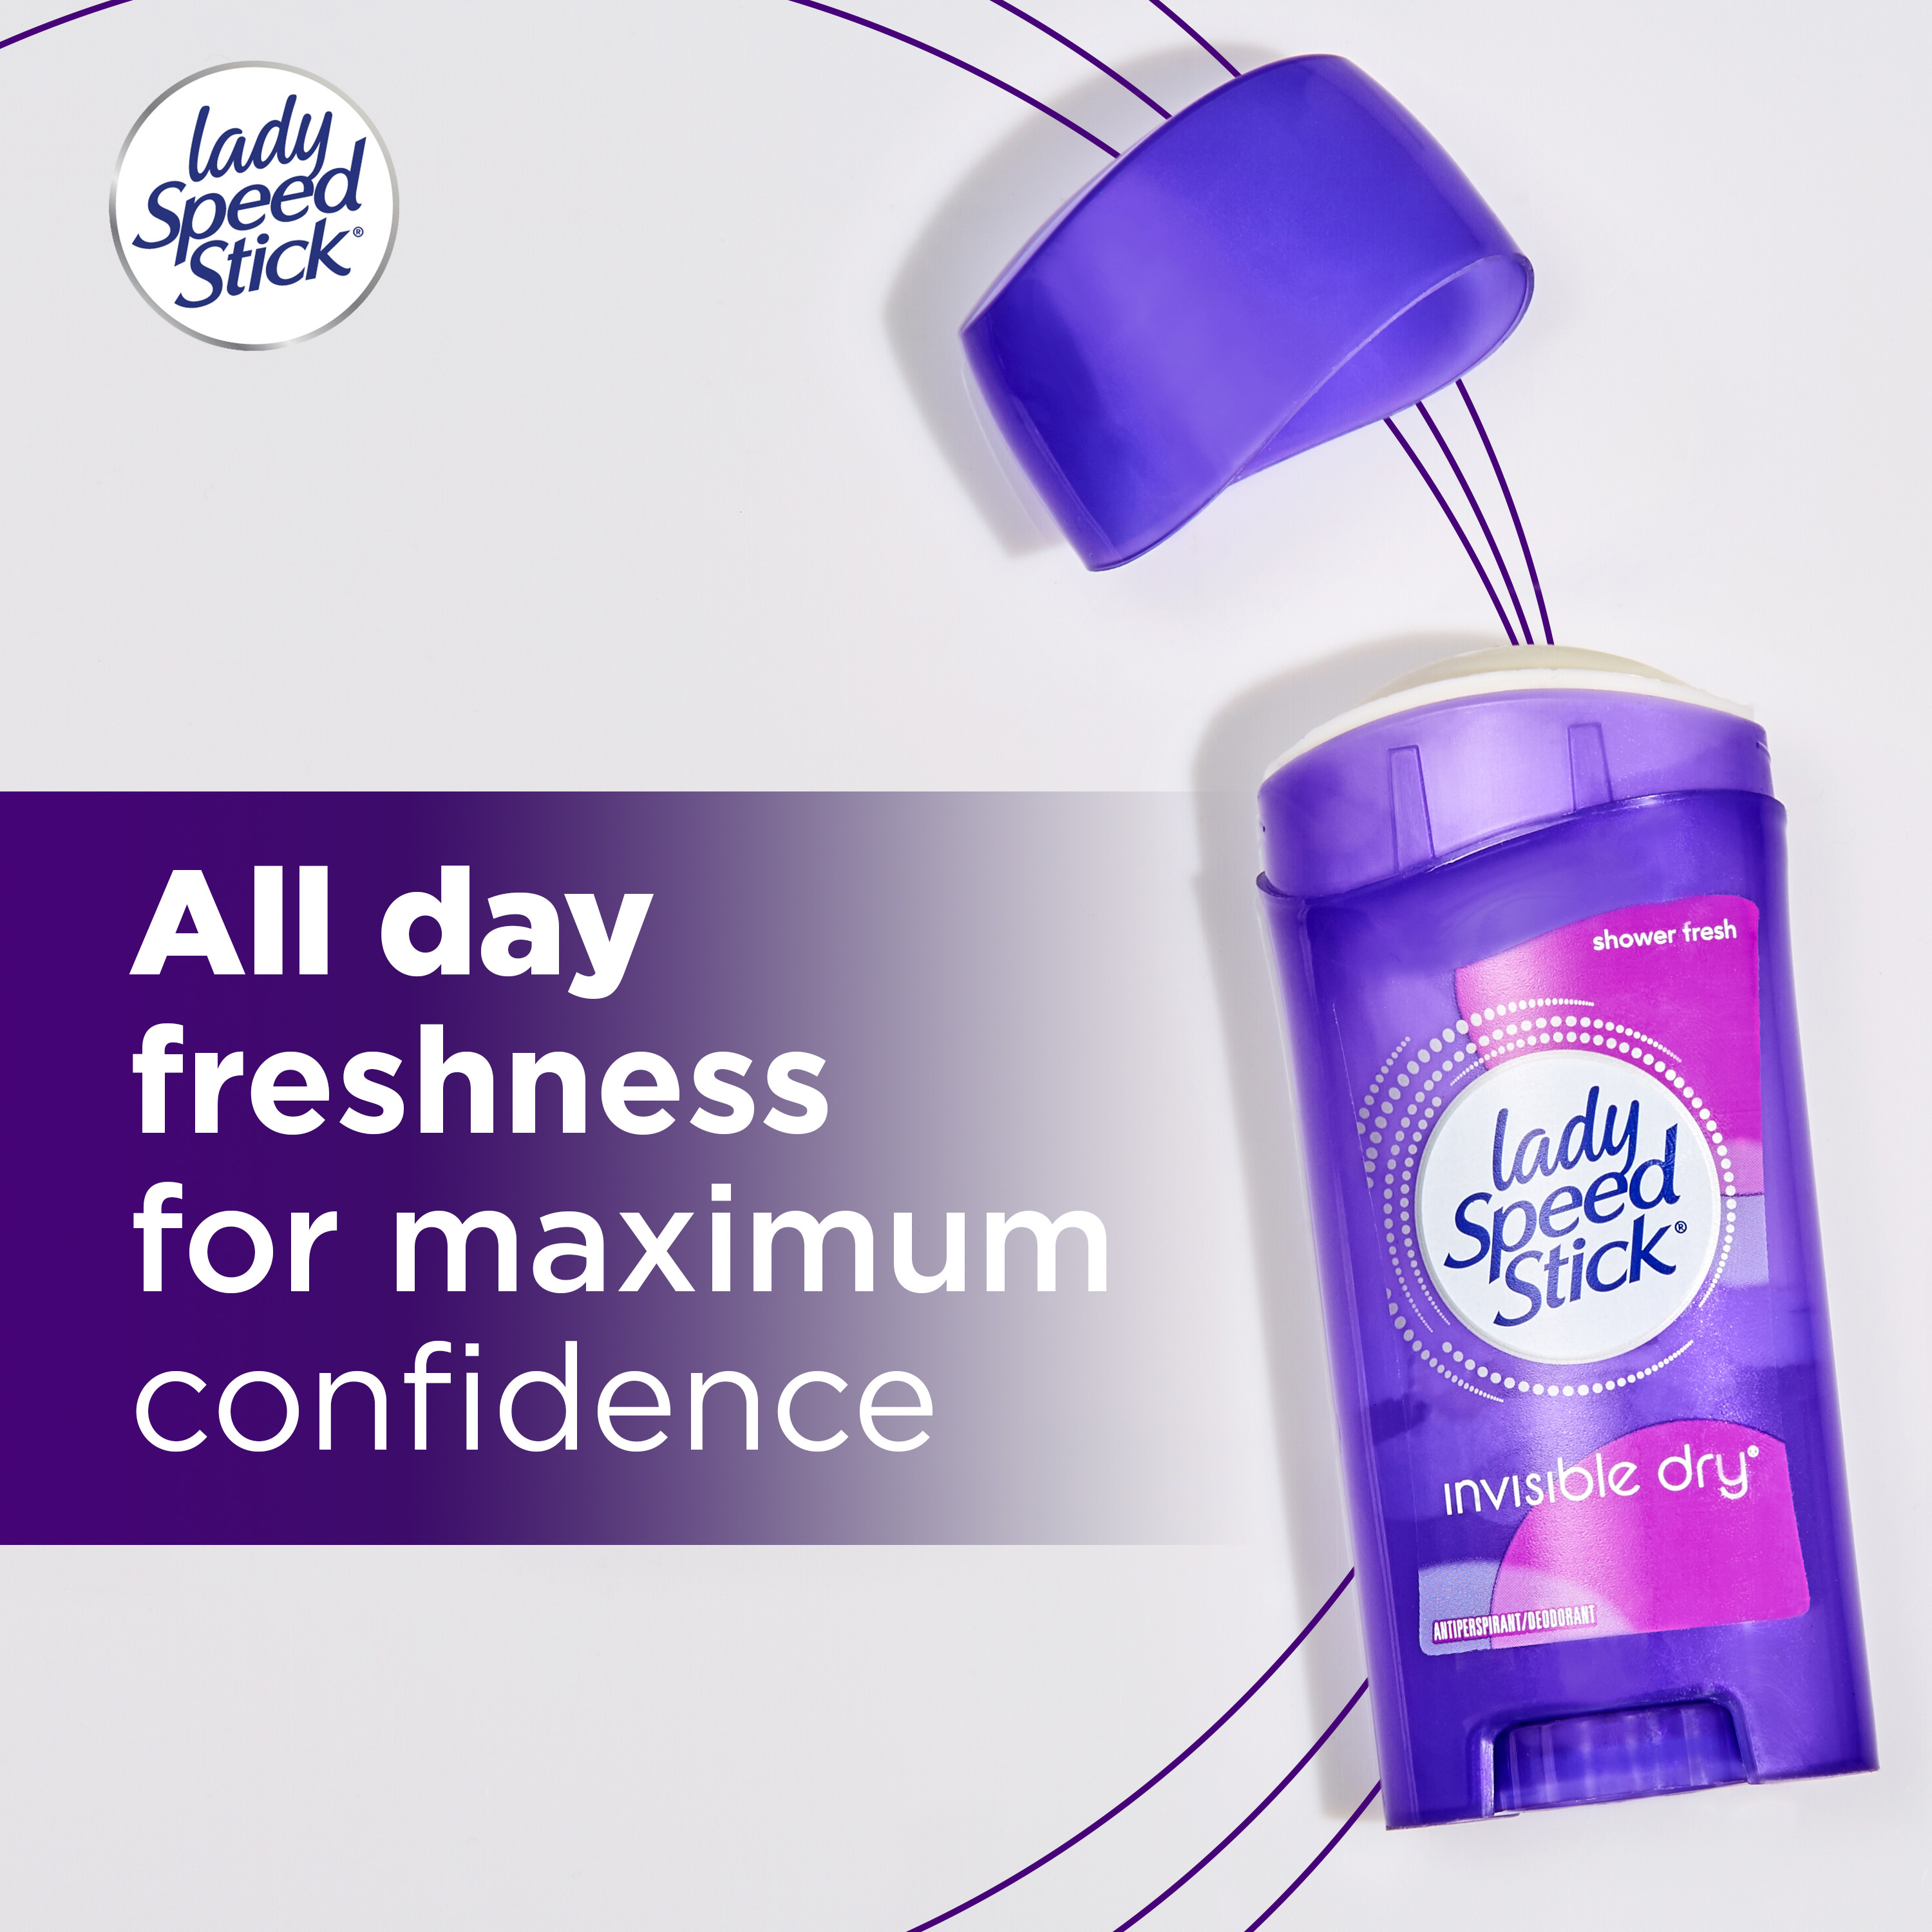 Lady Speed Stick Invisible Dry Antiperspirant Female Deodorant, Shower Fresh, 2 Pack, 2.3 oz - image 7 of 15